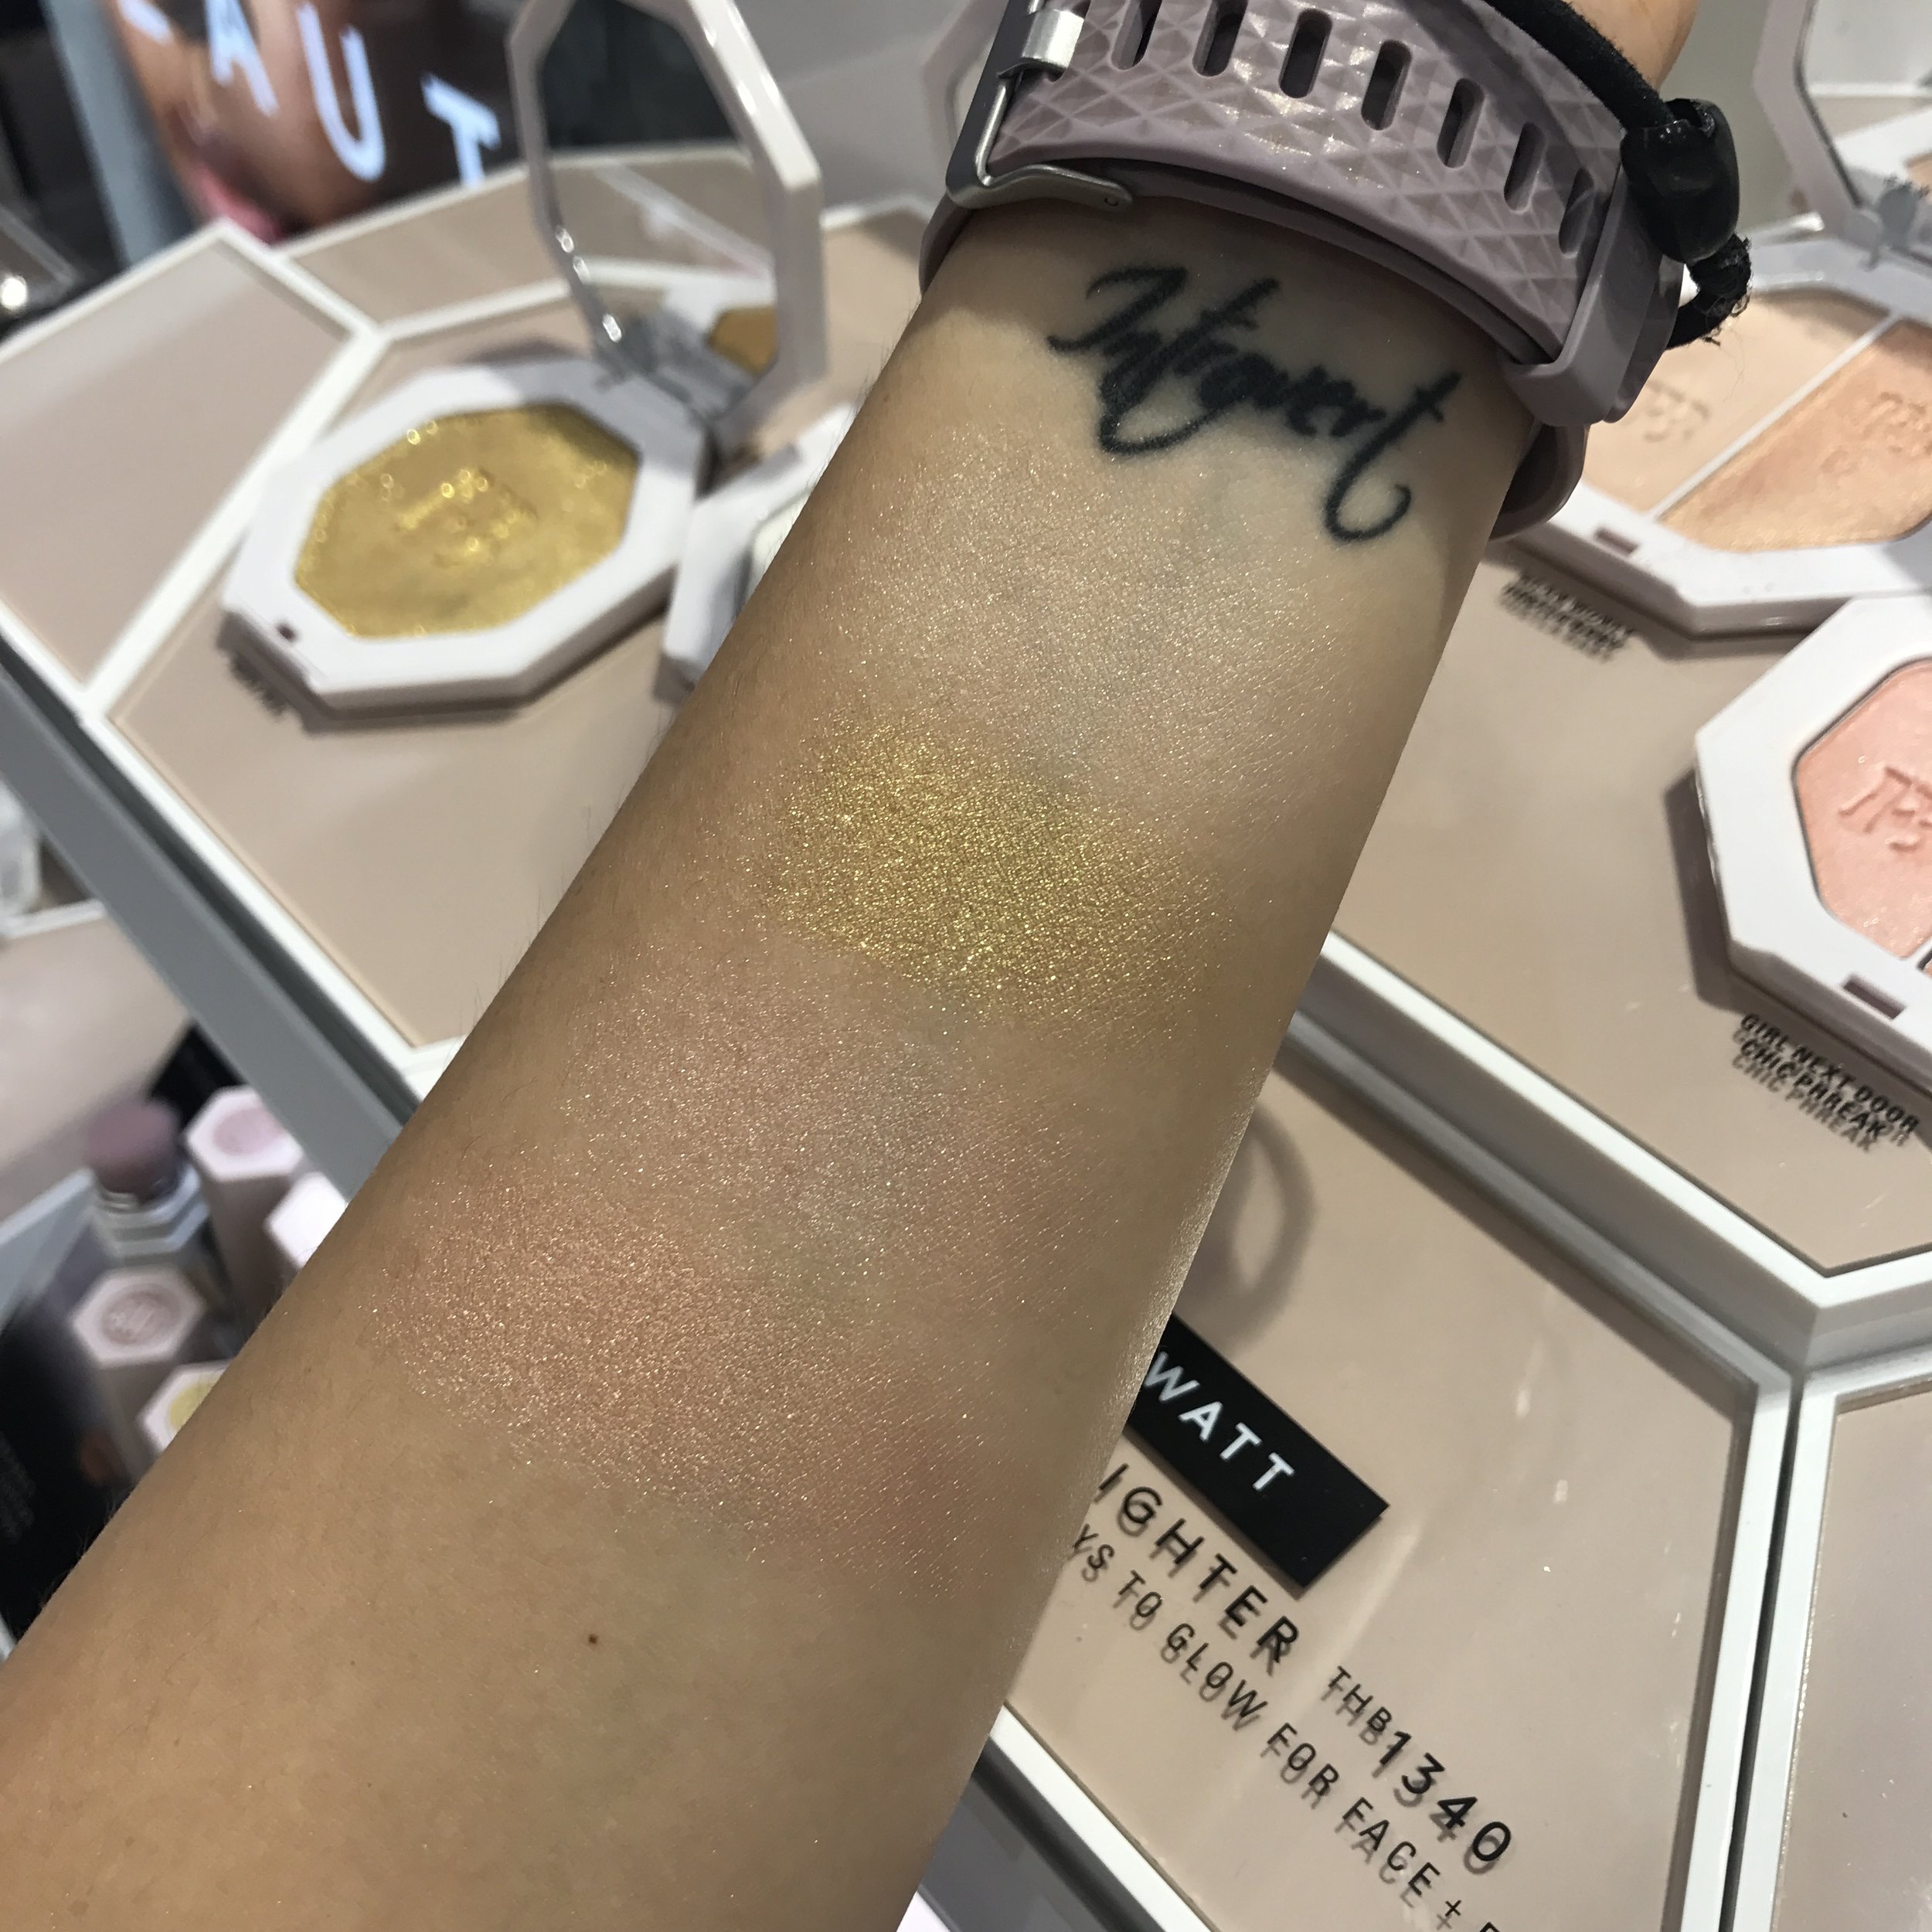 Haul - Reviews and Swatches! —